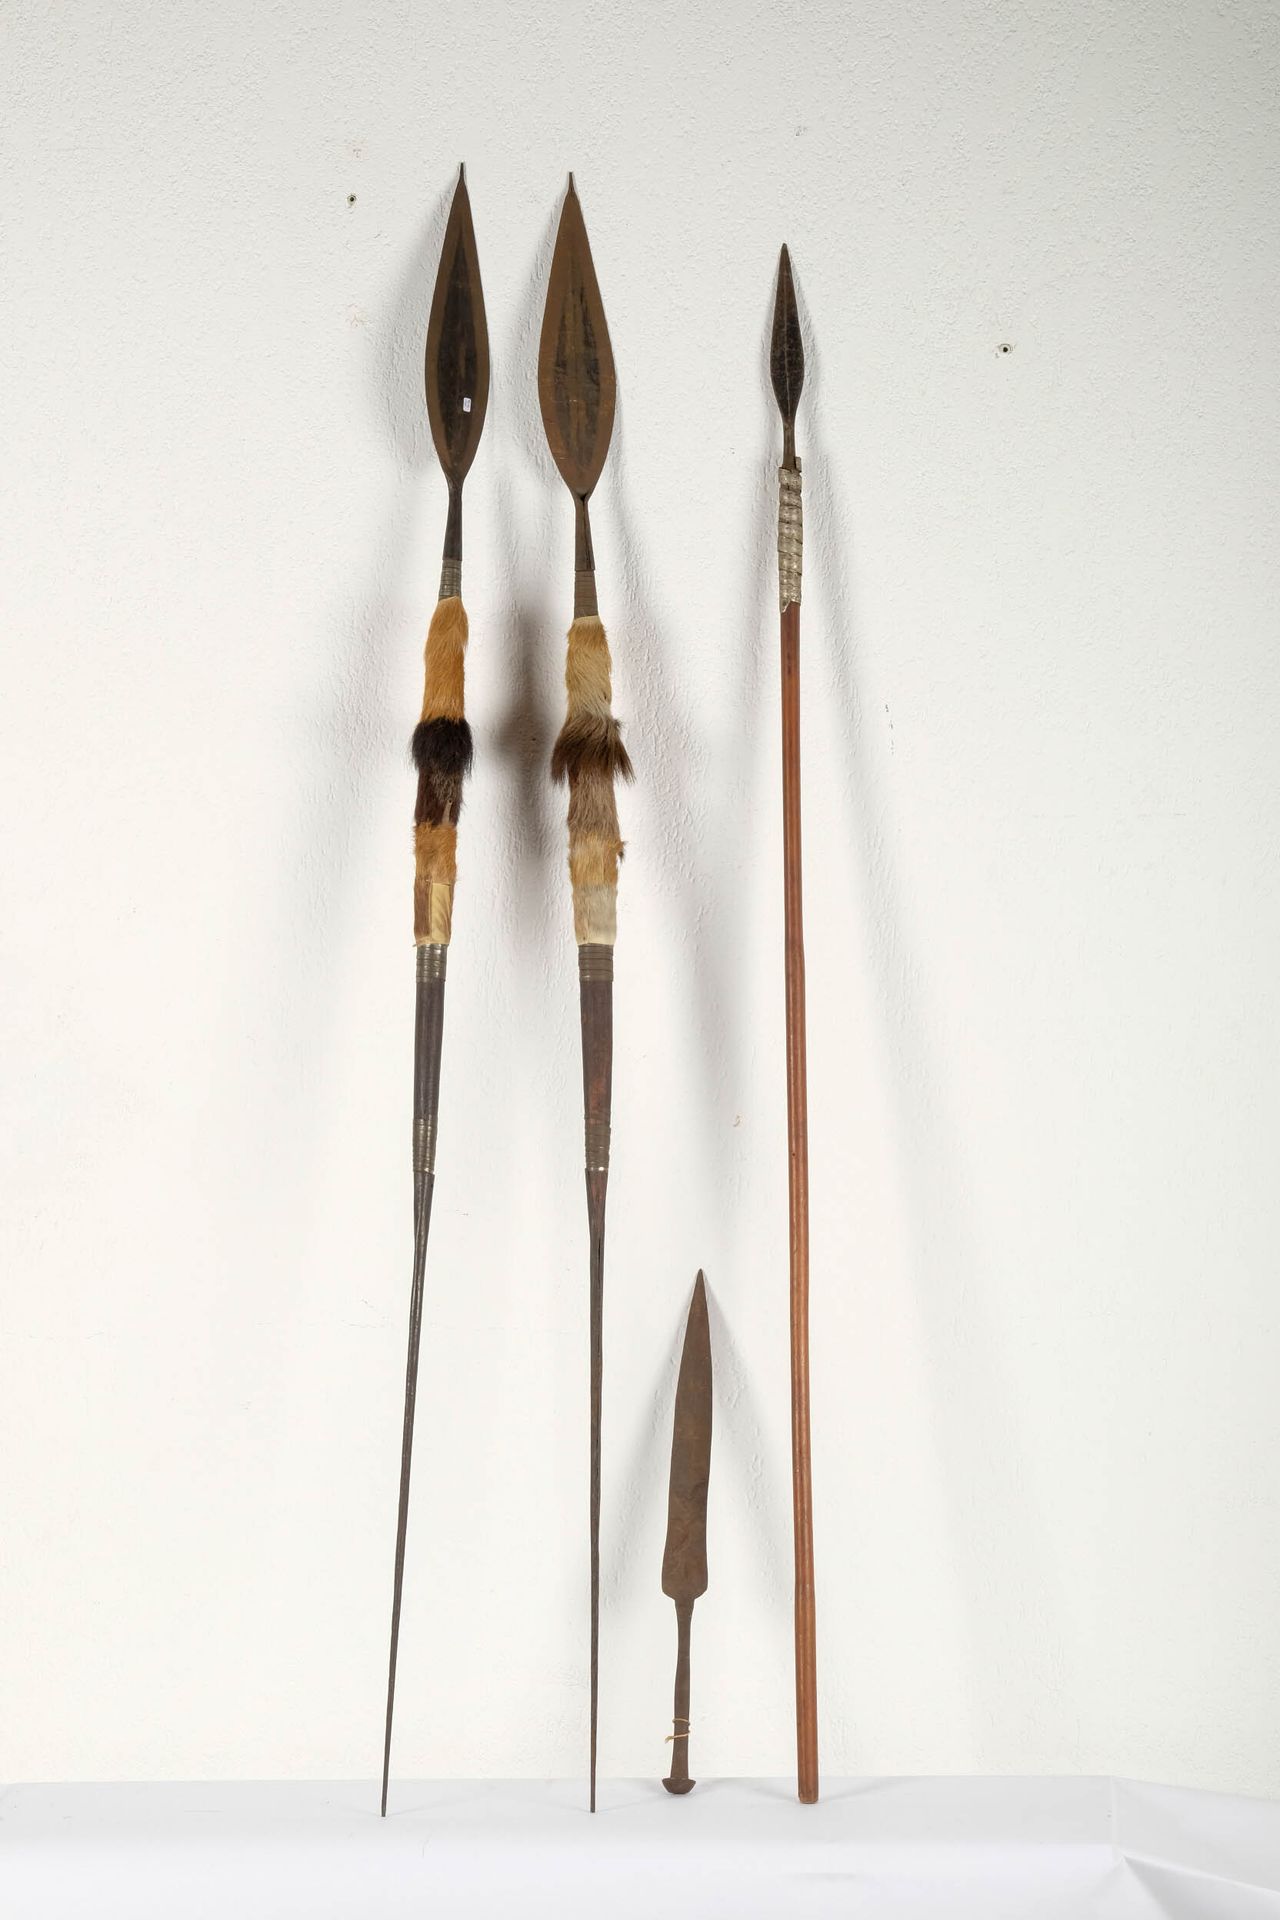 Arme – Armurerie 2 assegais and a Congolese spear. A knife is attached.